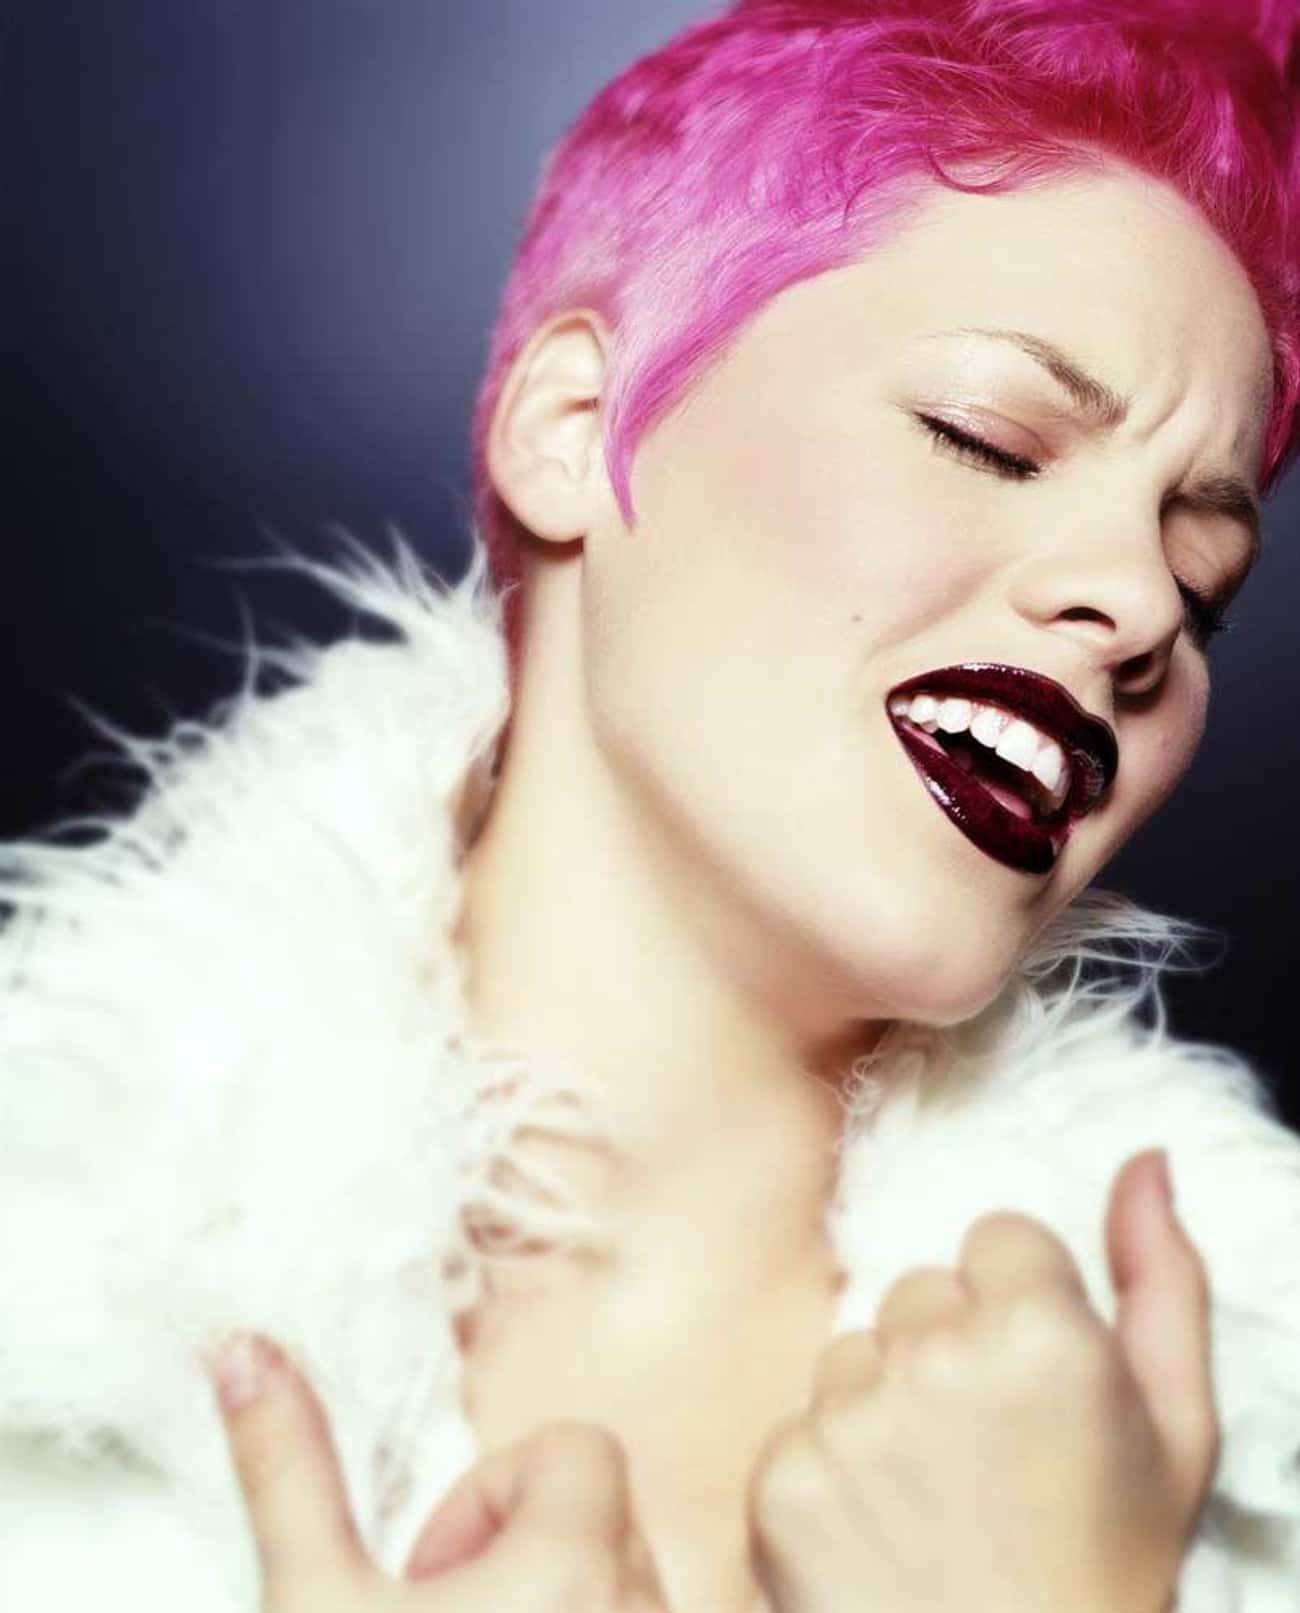 1999: When P!nk Was Actually Pink